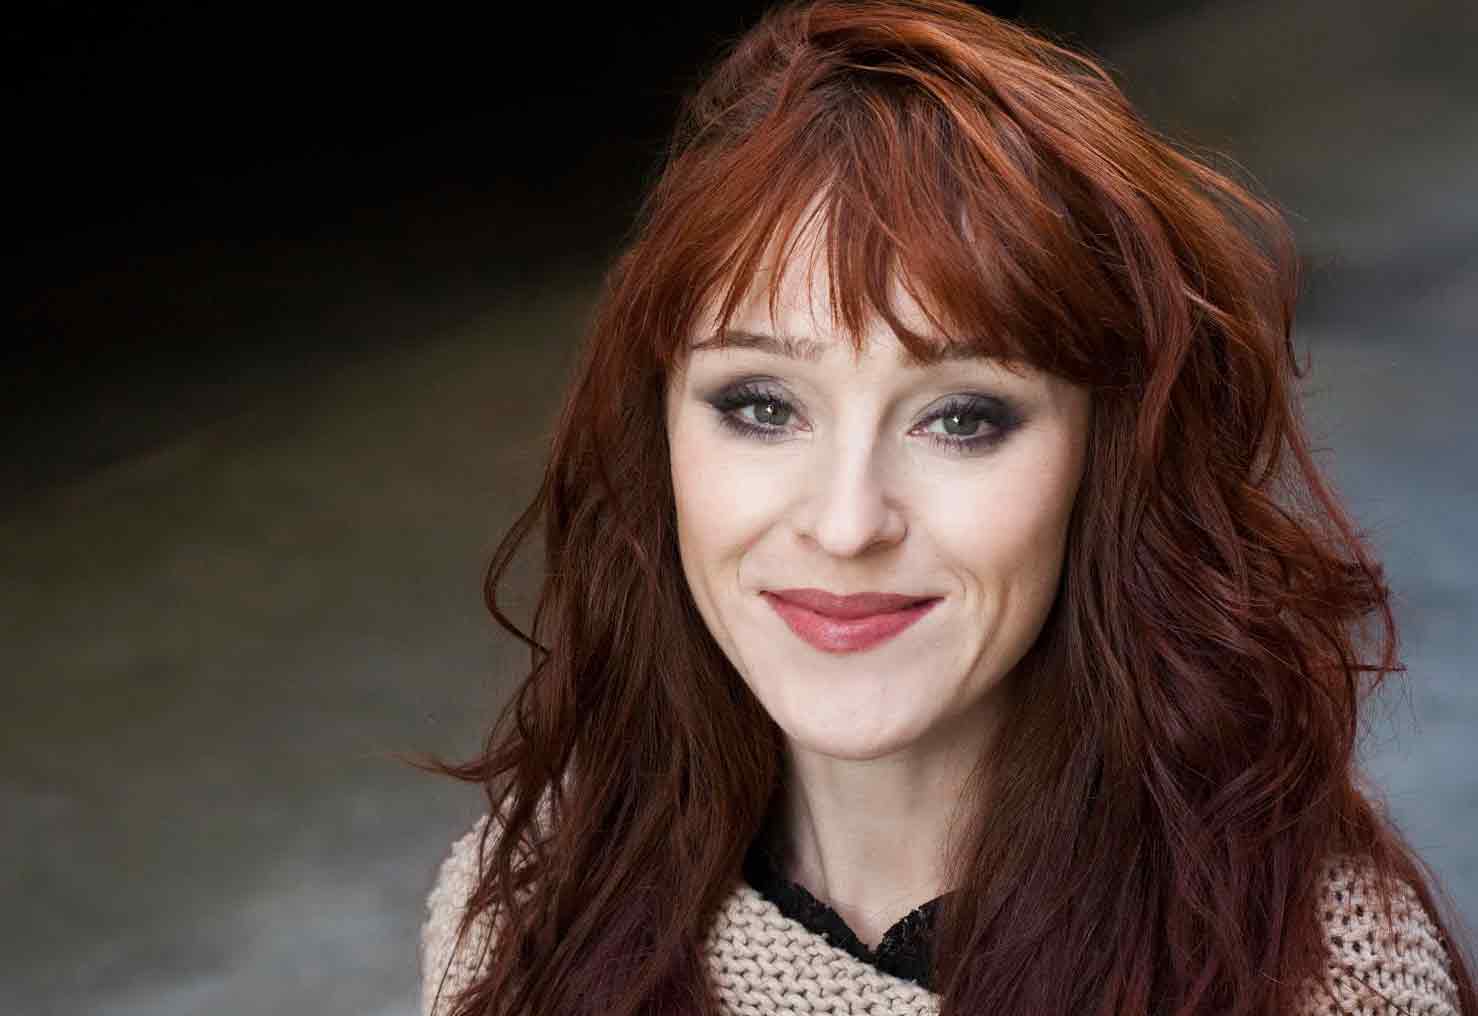 Ruth Connell - Net Worth 2022, Salary, Age, Height, Bio, Family, Career.